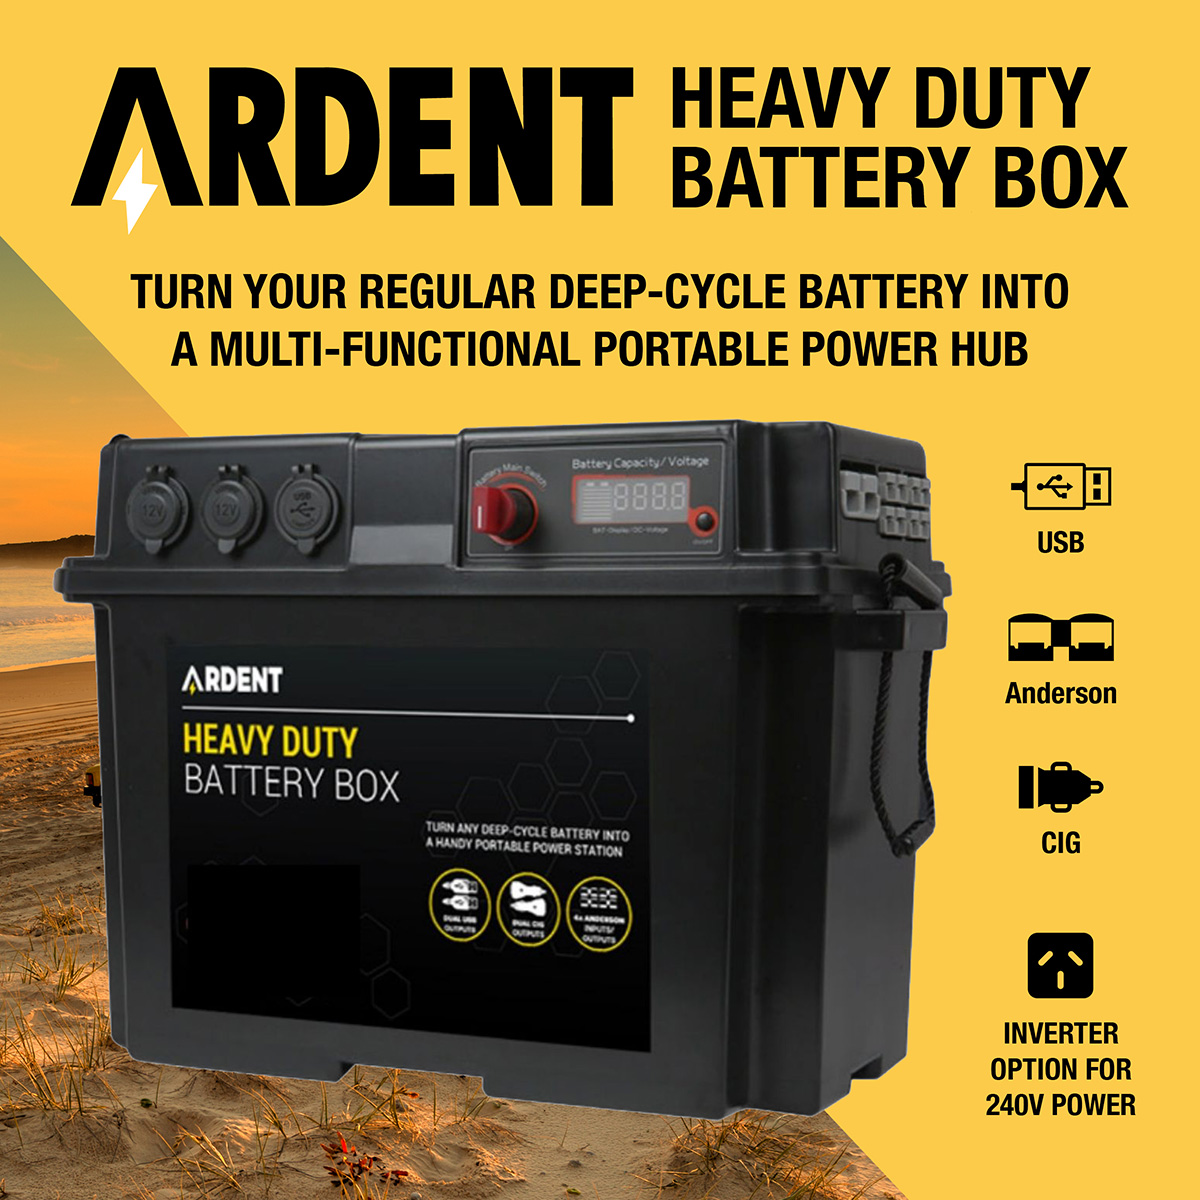 Inverter and Battery Box